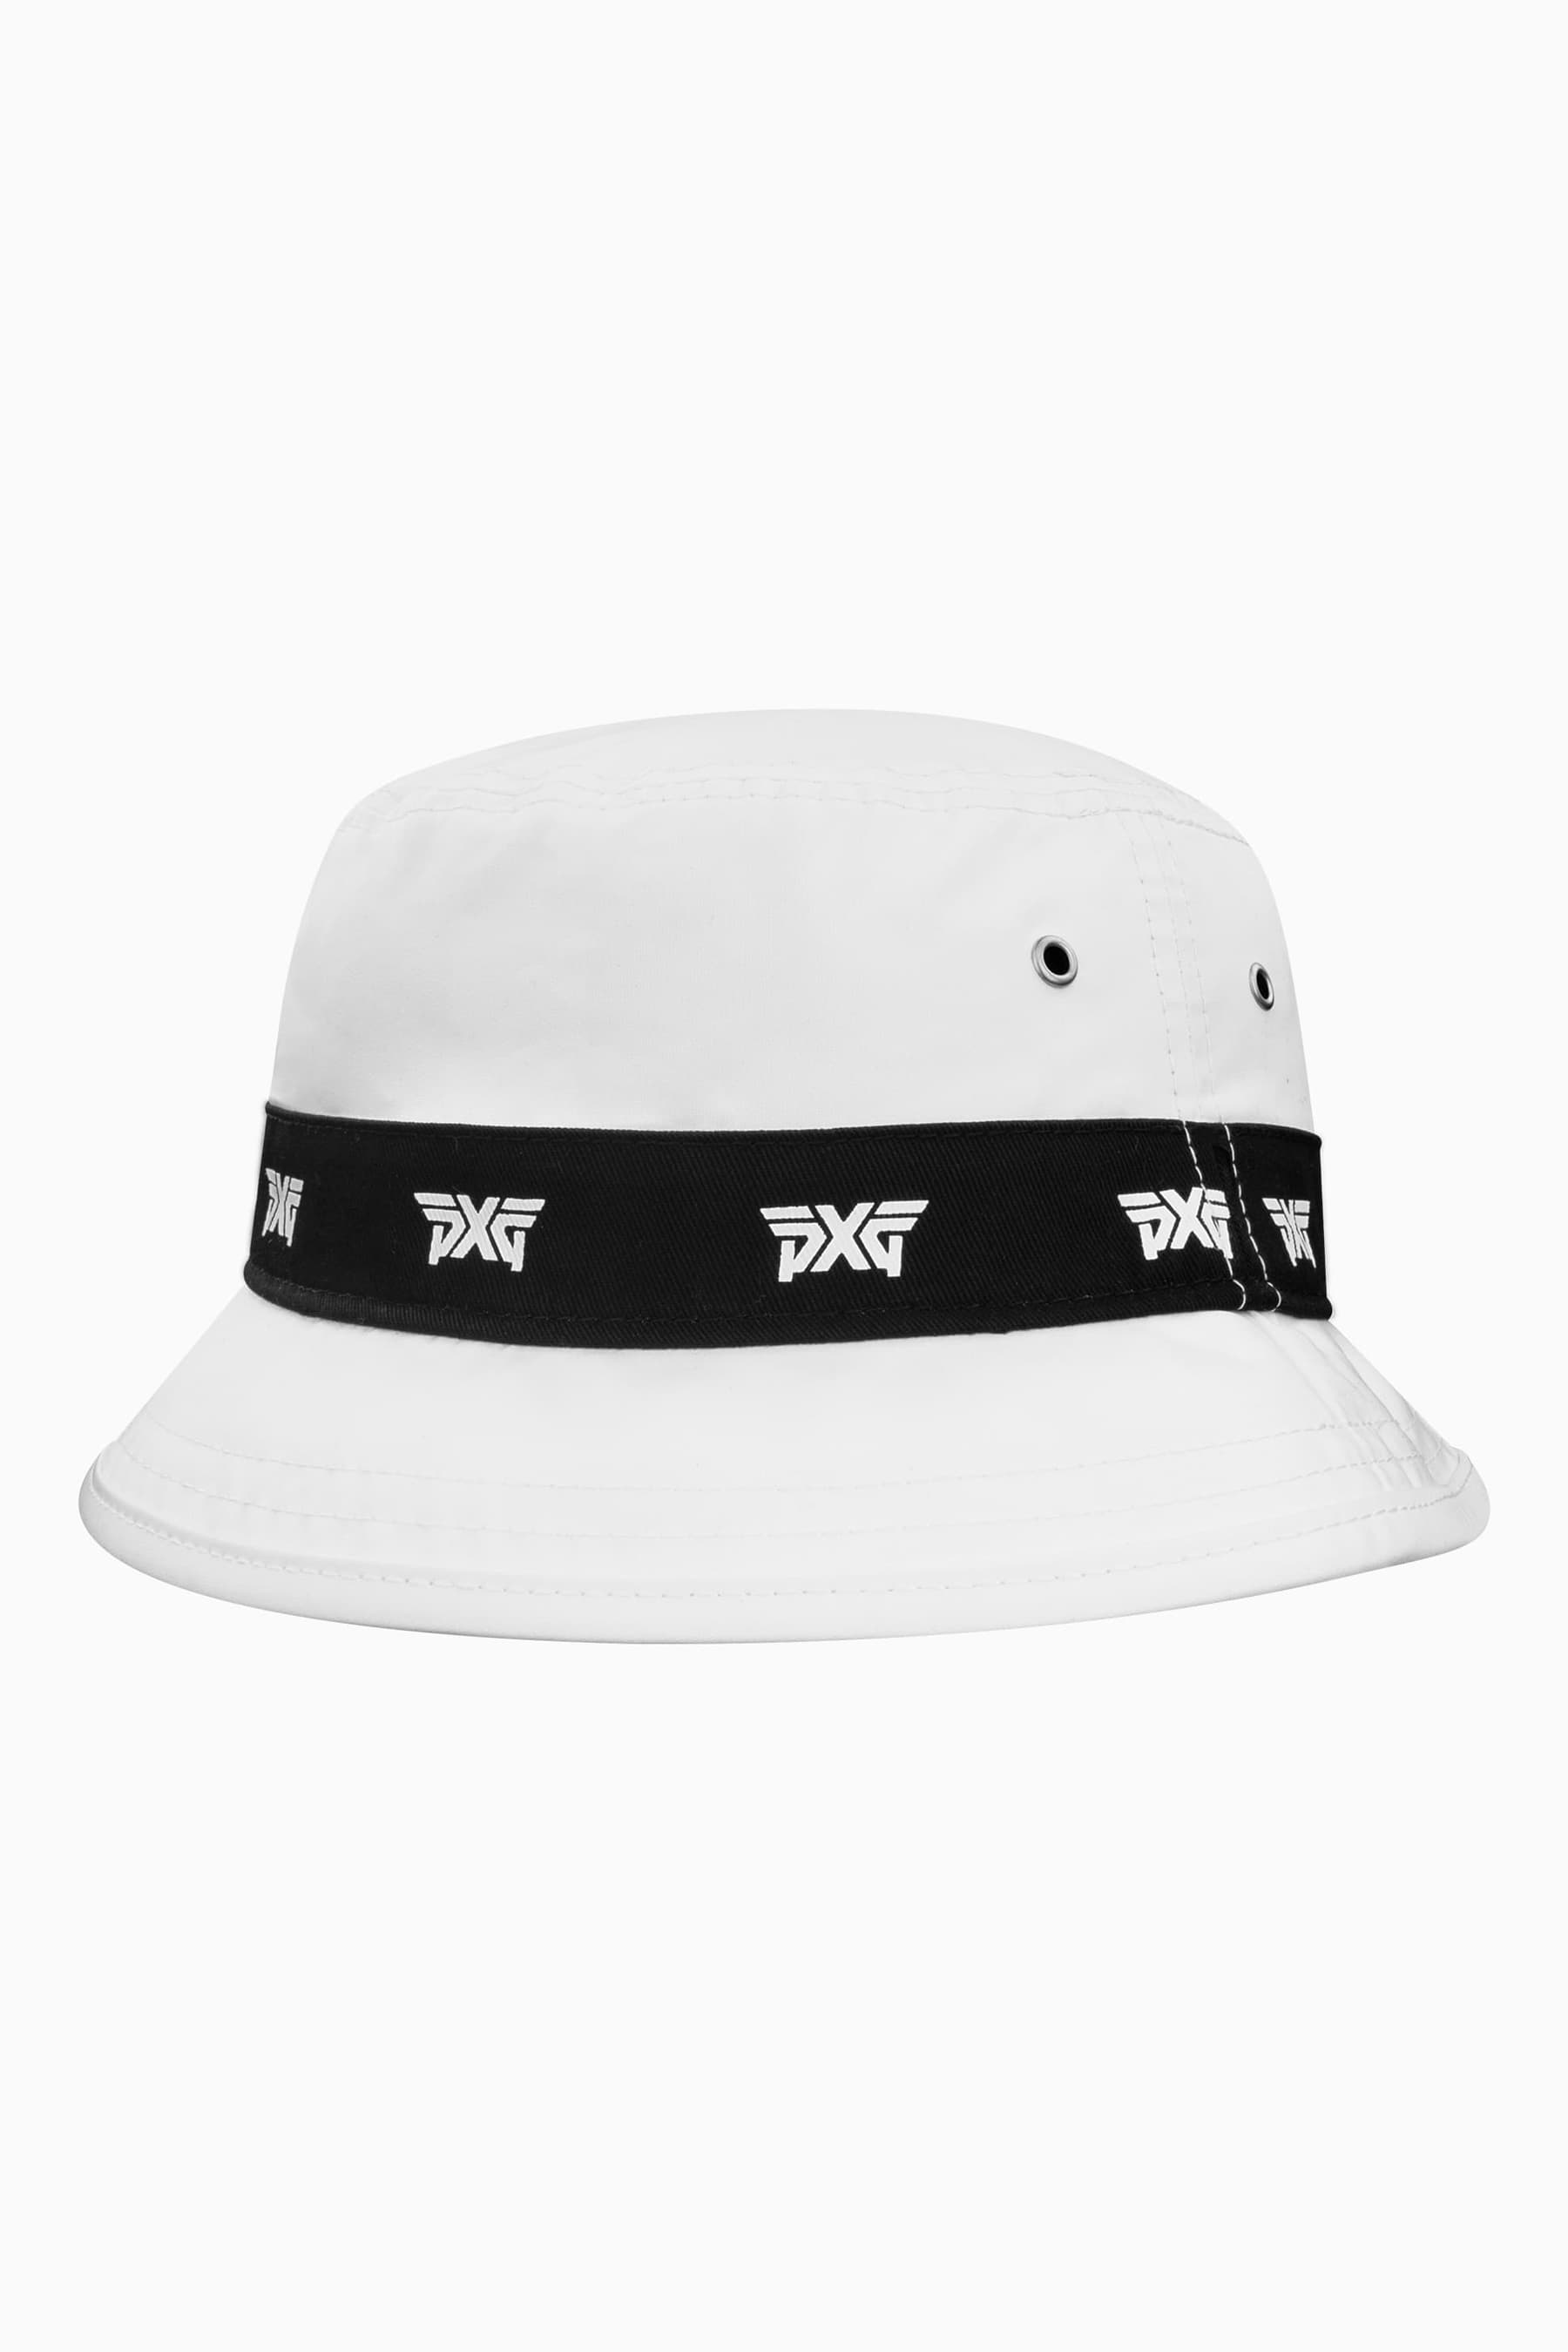 Logo Repeat Bucket Hat | Shop the Highest Quality Golf Apparel, Gear,  Accessories and Golf Clubs at PXG